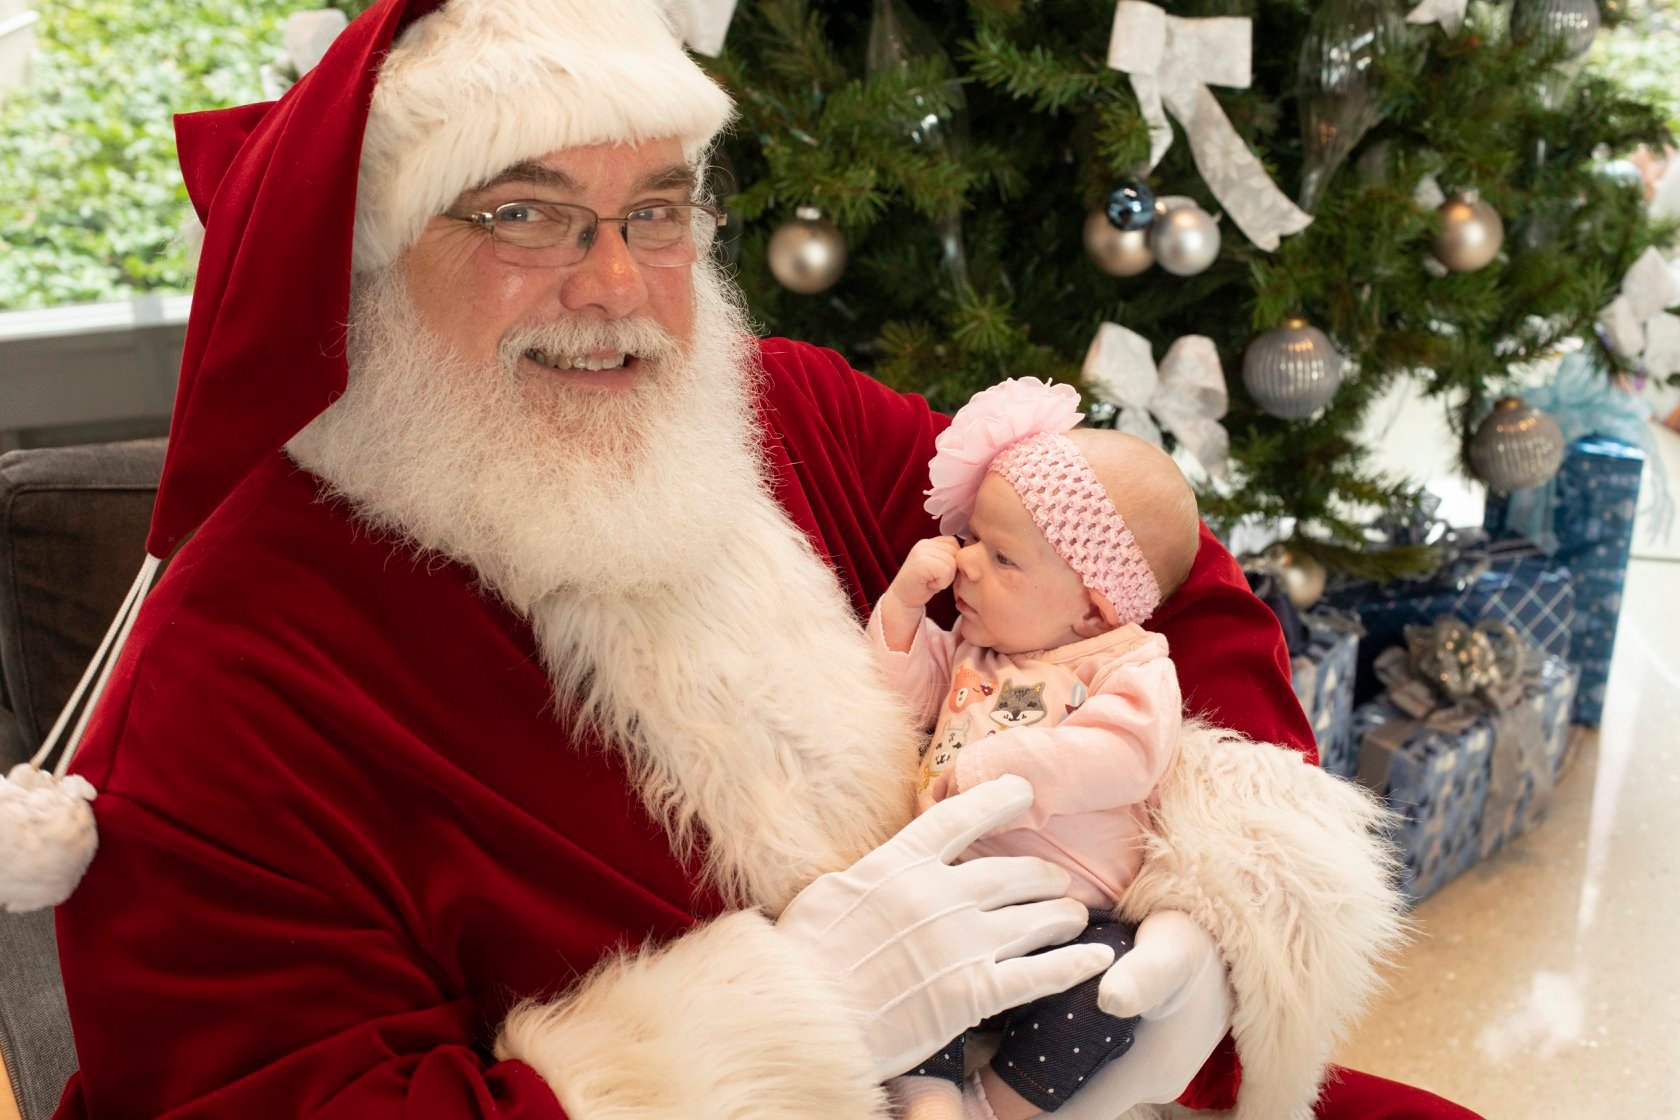 Santa with a baby